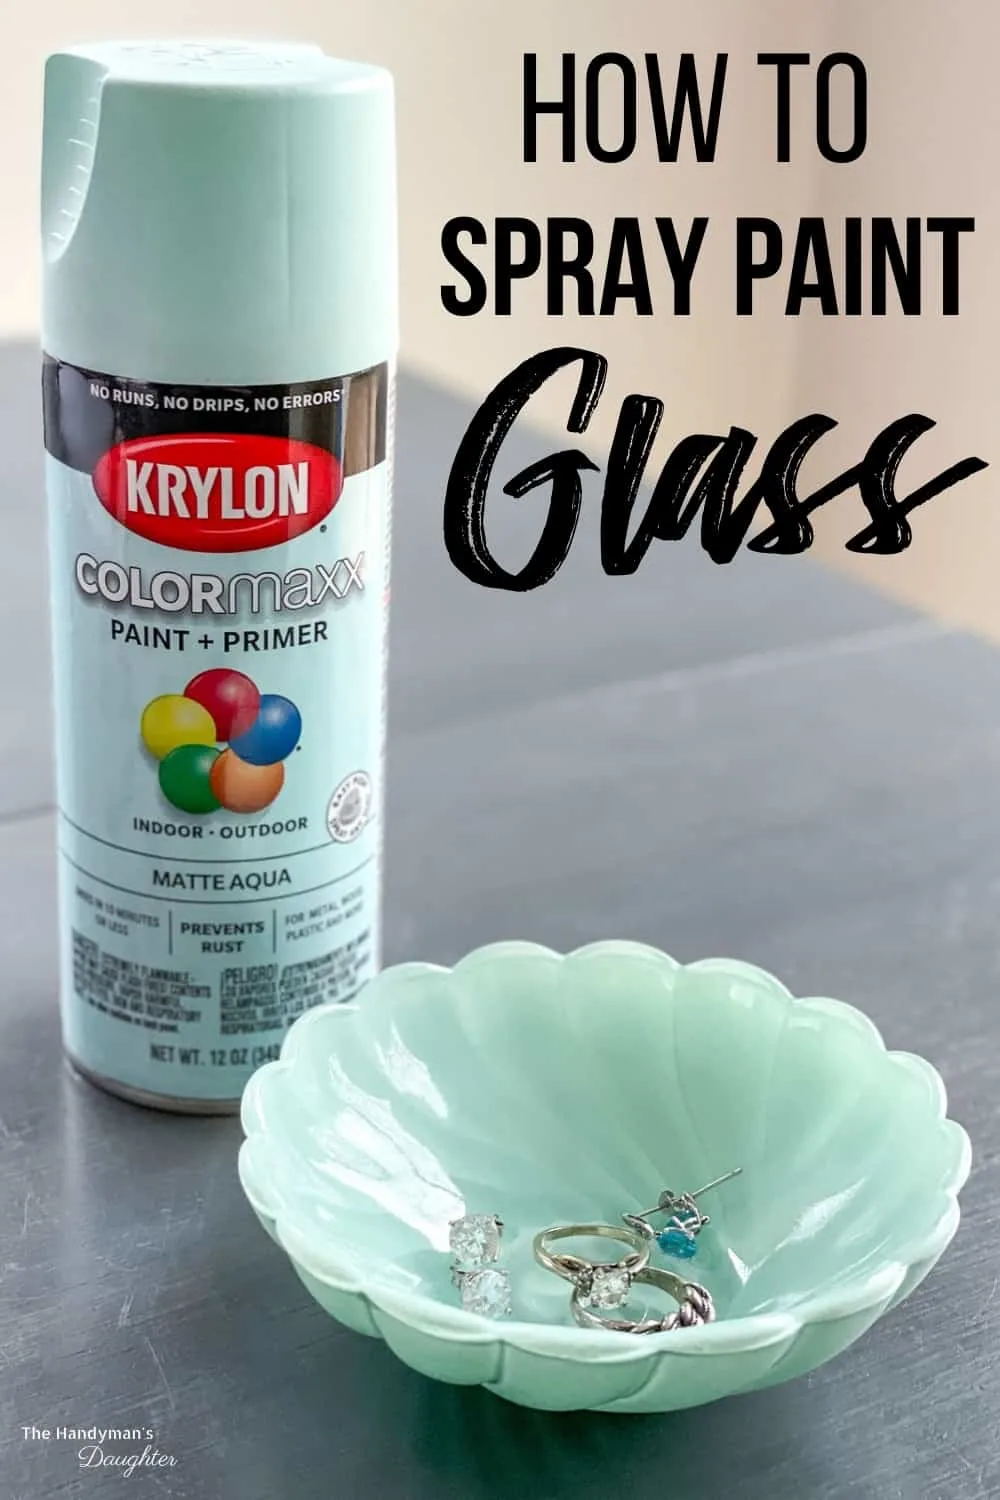 Spray Paint For Metal Surfaces And Other DIY Ideas